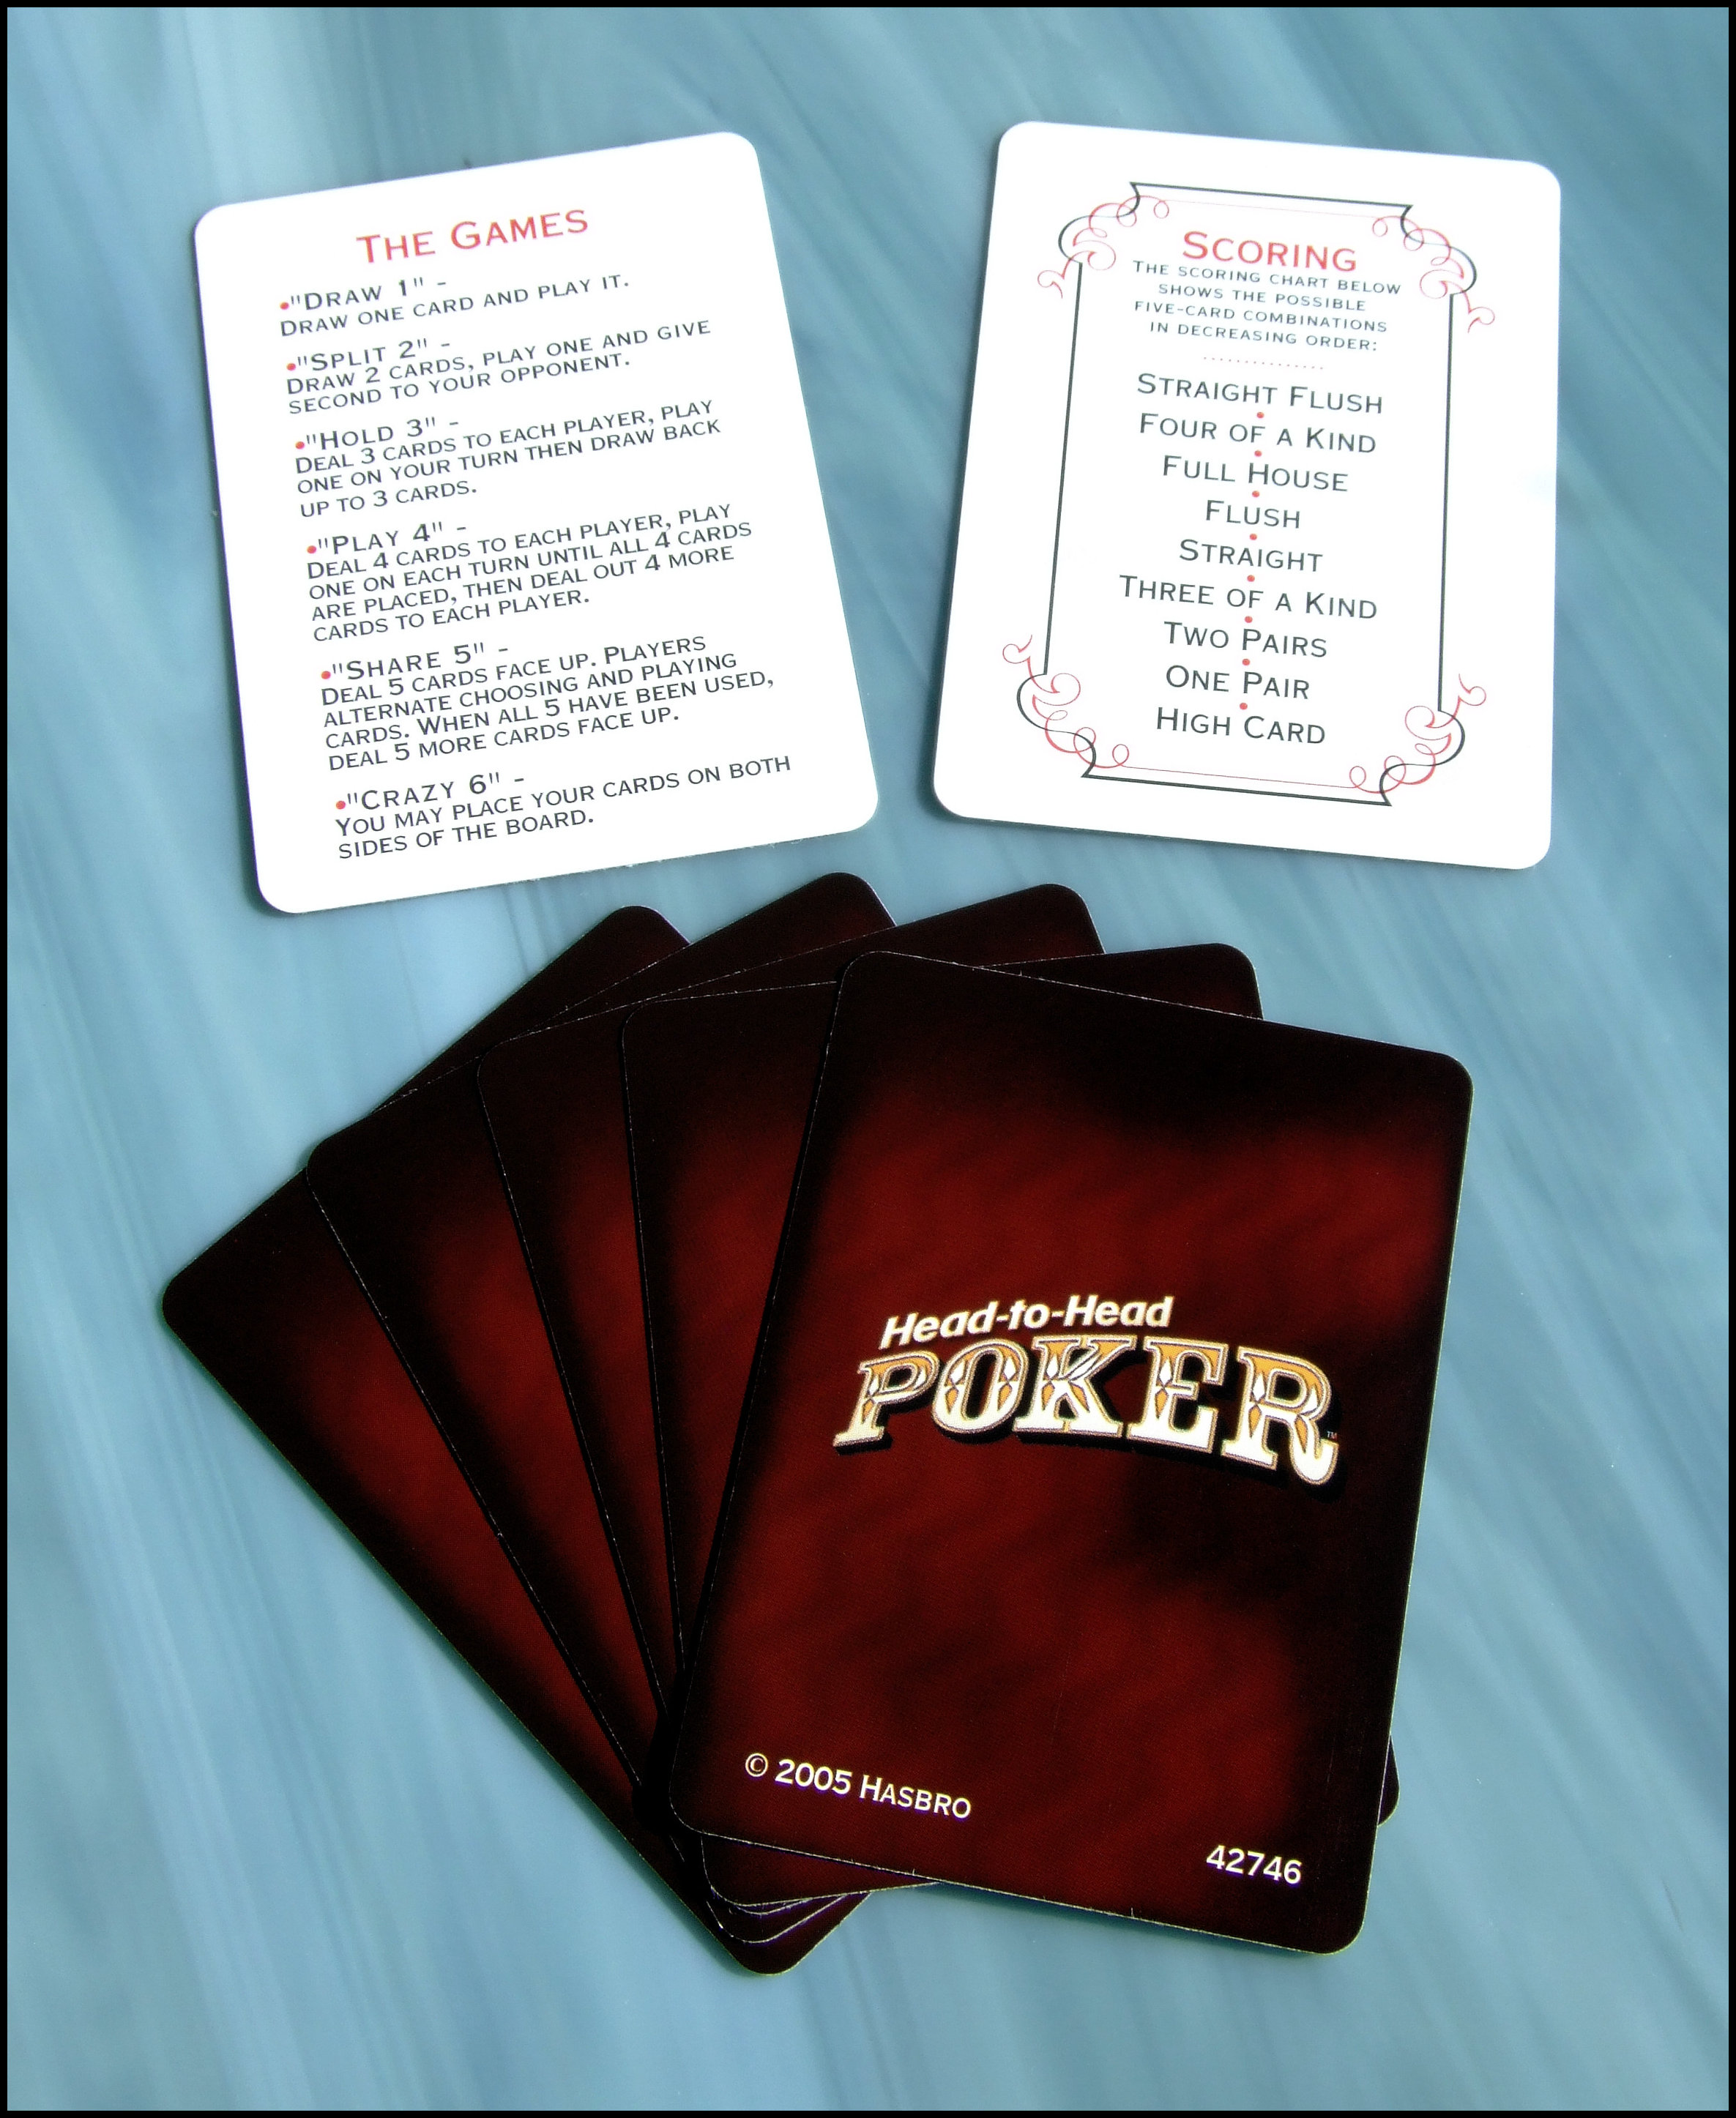 Head-To-Head Poker - Card Backs And Score Cards